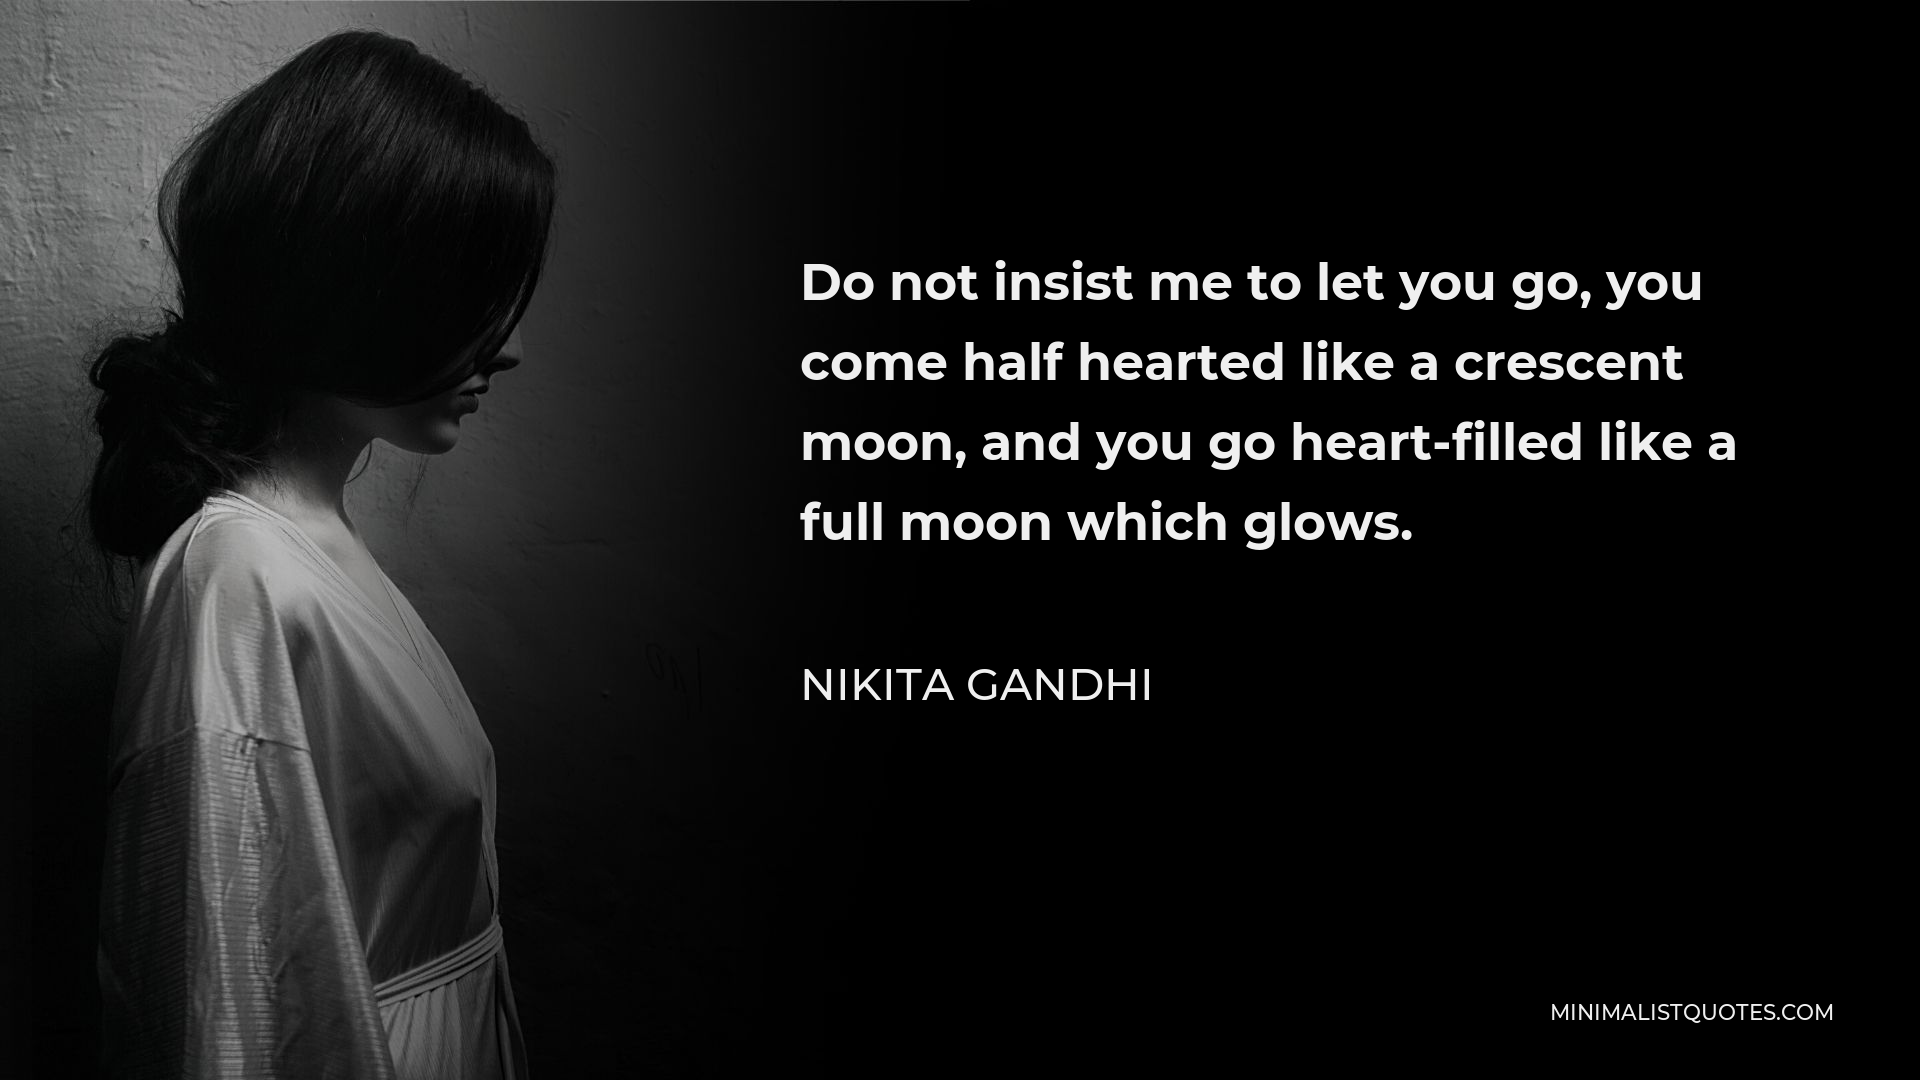 Nikita Gandhi Quote - Do not insist me to let you go, you come half hearted like a crescent moon, and you go heart-filled like a full moon which glows.